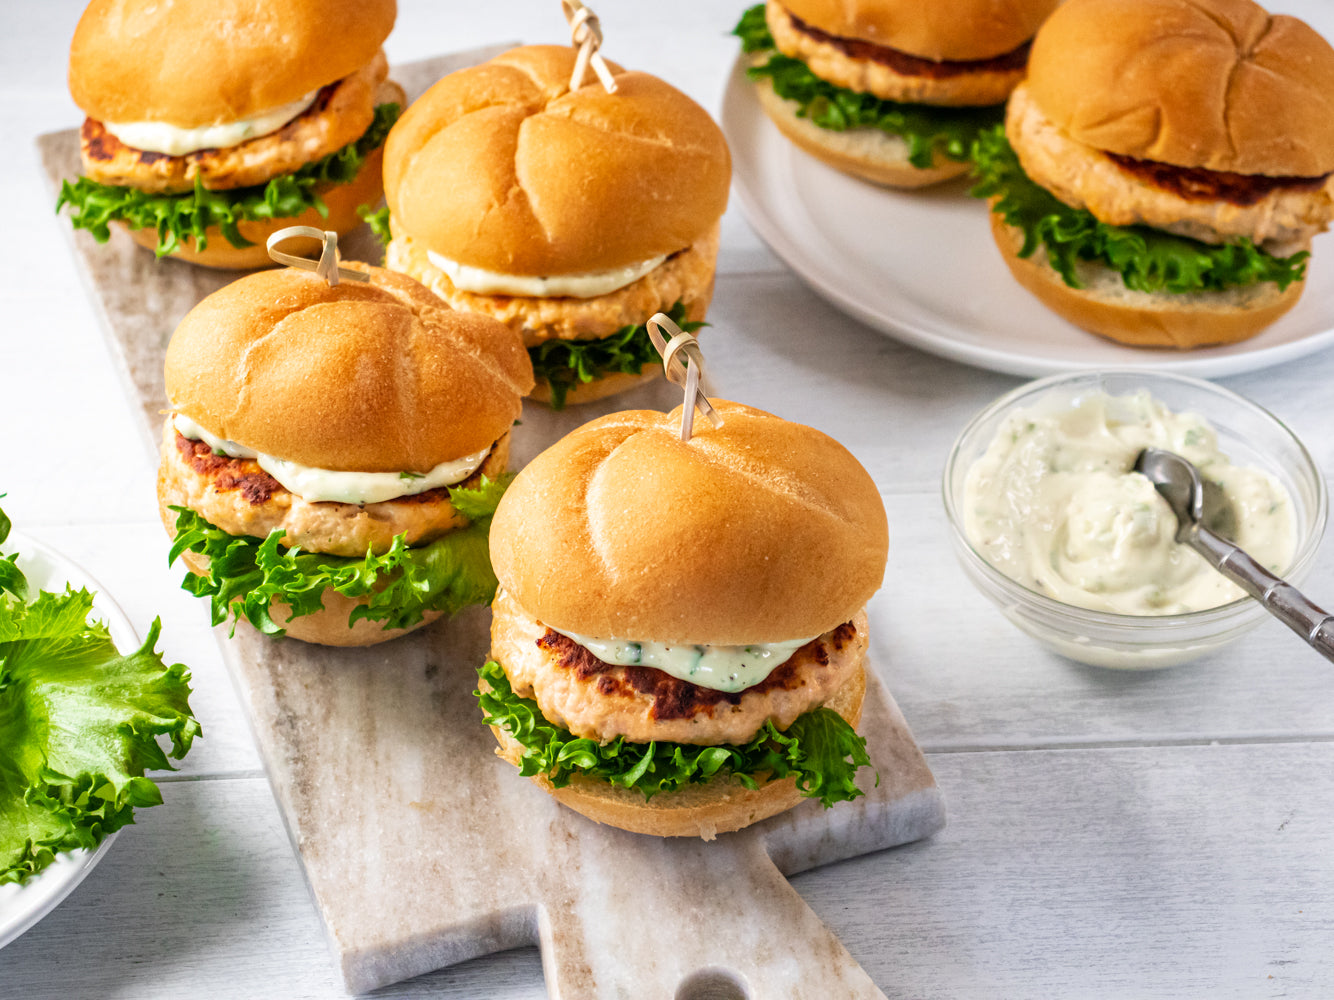 Discover The History Of Sliders